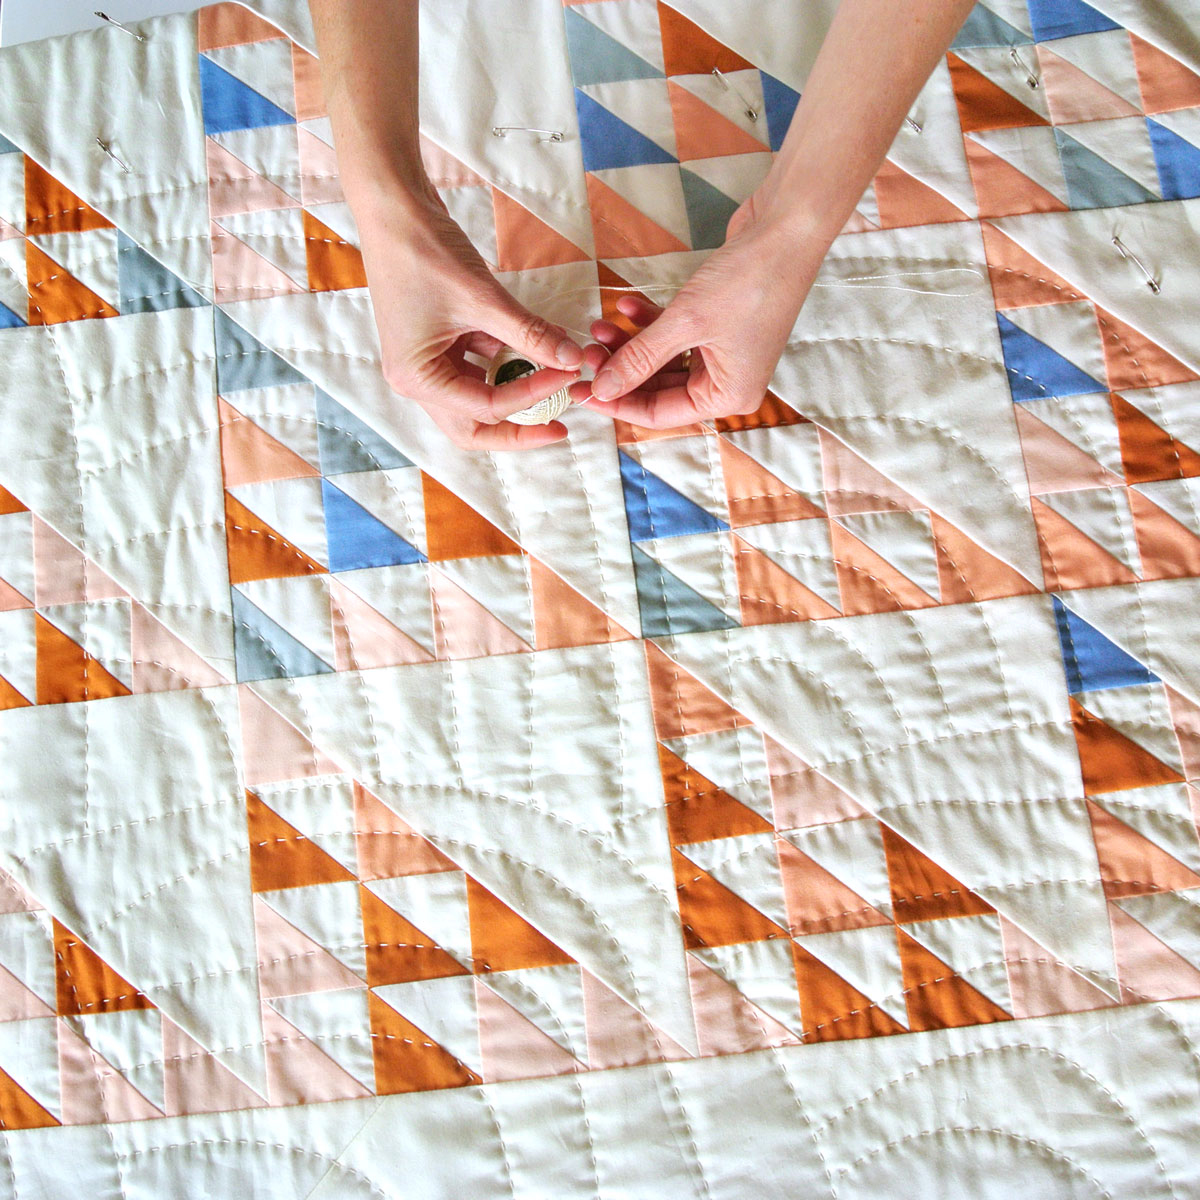 How to hand quilt in 3 easy steps! In this blog and video tutorial I'll list out all of the supplies you need and show you how simple hand quilting can be.